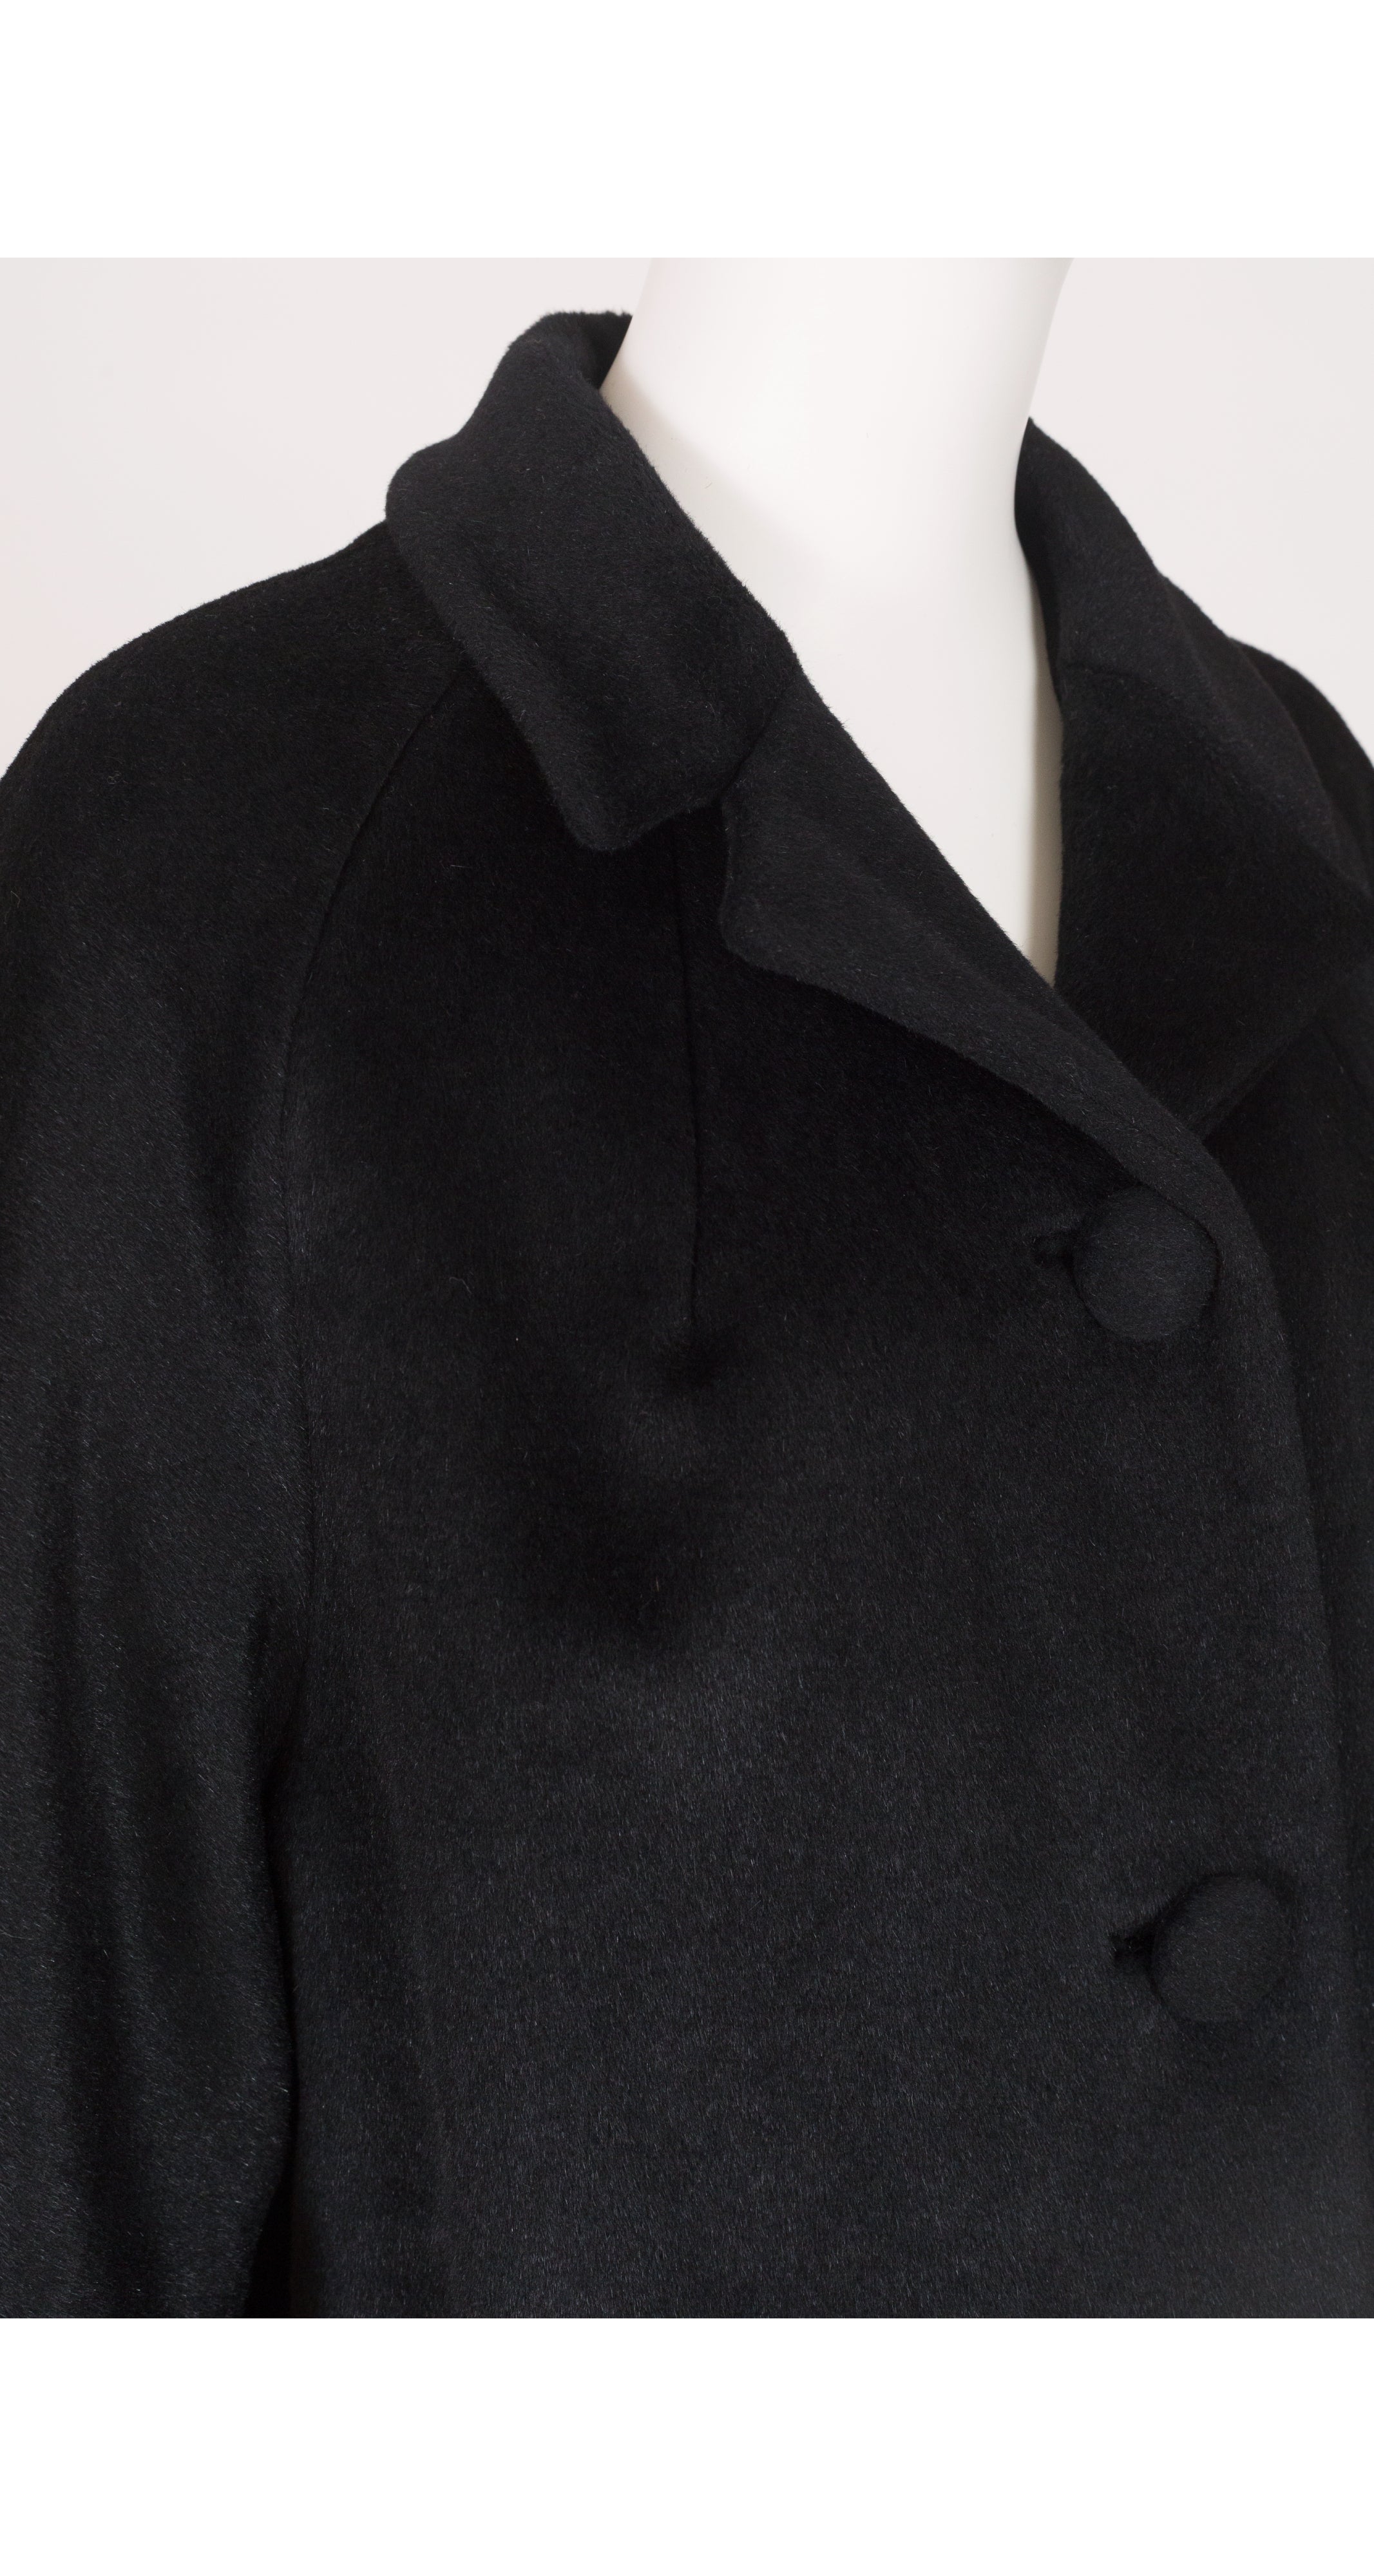 Lilli Ann 1950s Vintage Black Mohair Collared Cocoon Coat ...